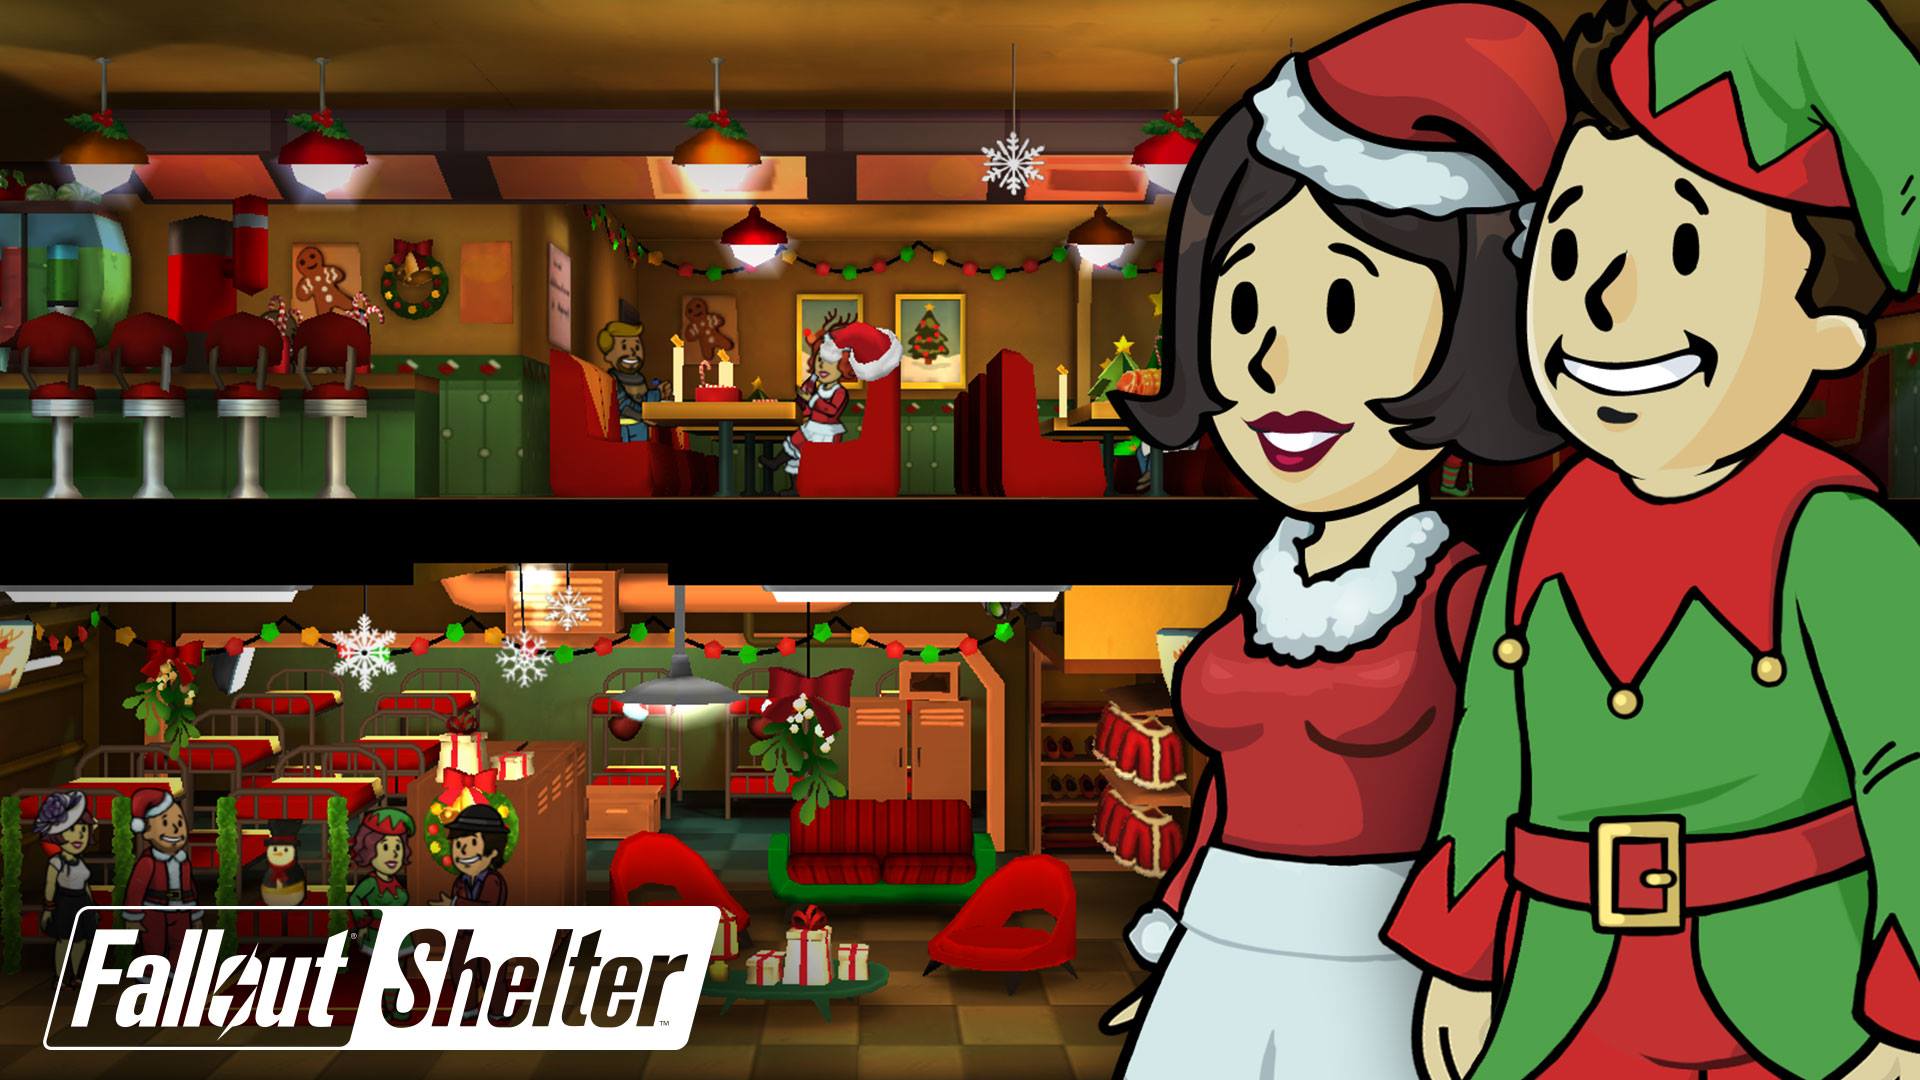 Fallout Shelter (2015) promotional art